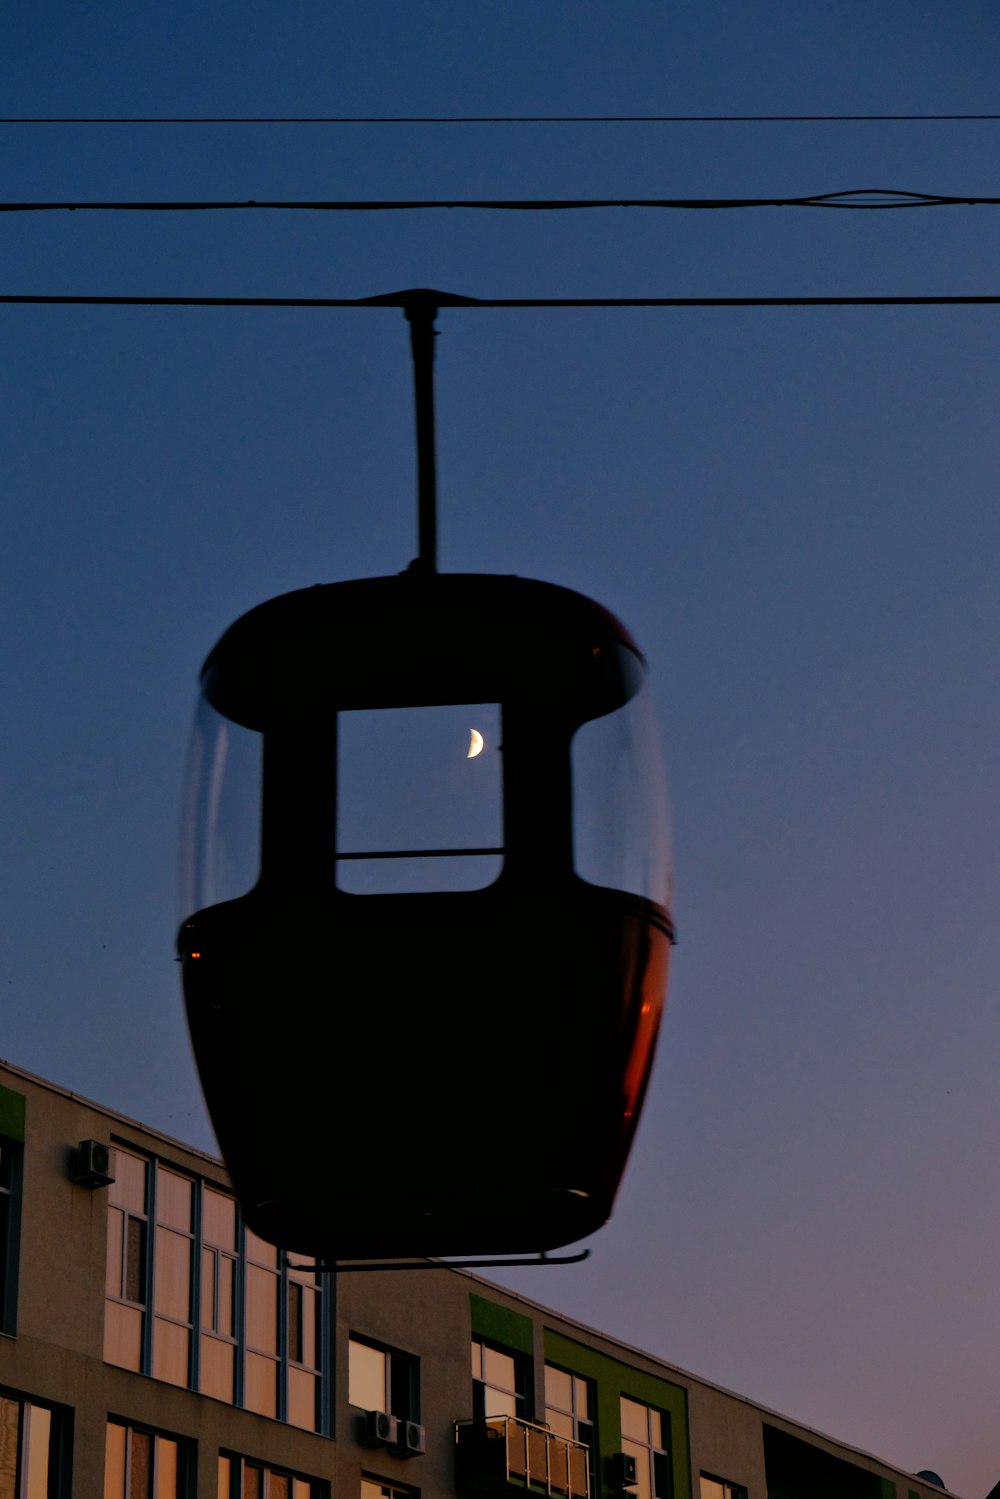 a gondola with a half moon in the sky